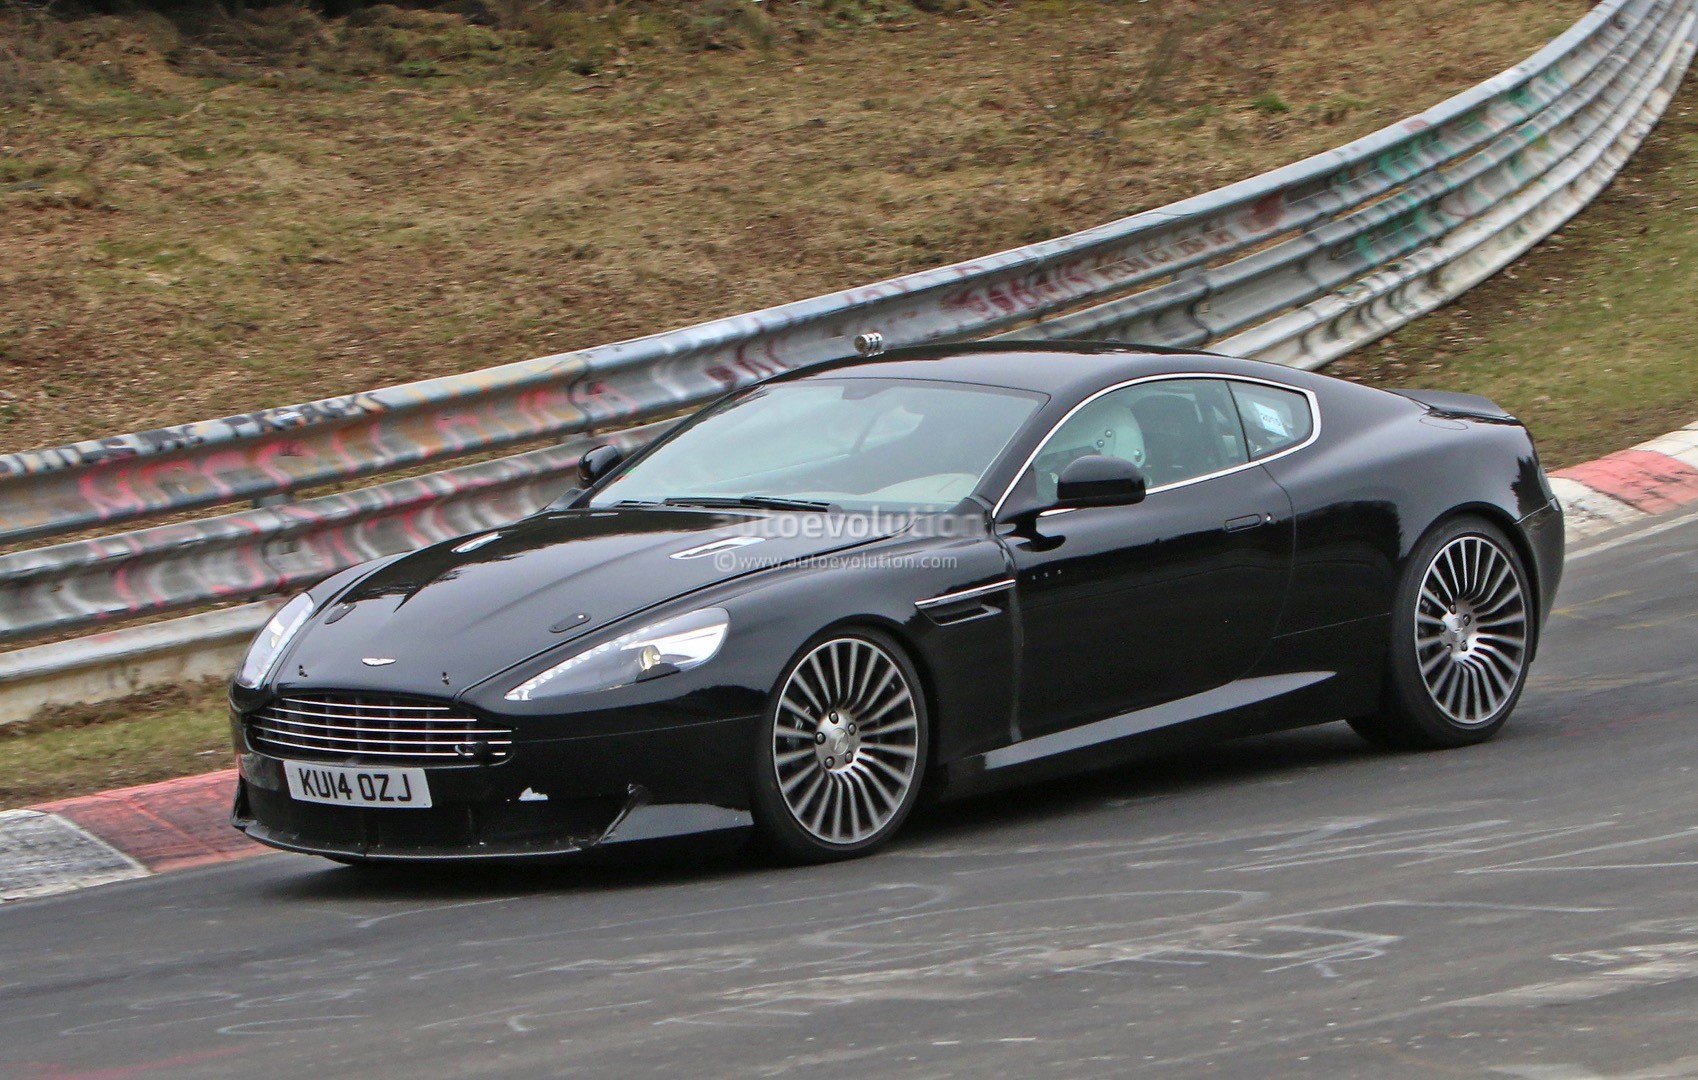 2016 Aston Martin DB9 Spied, It’s Powered By an Atmospheric V12 